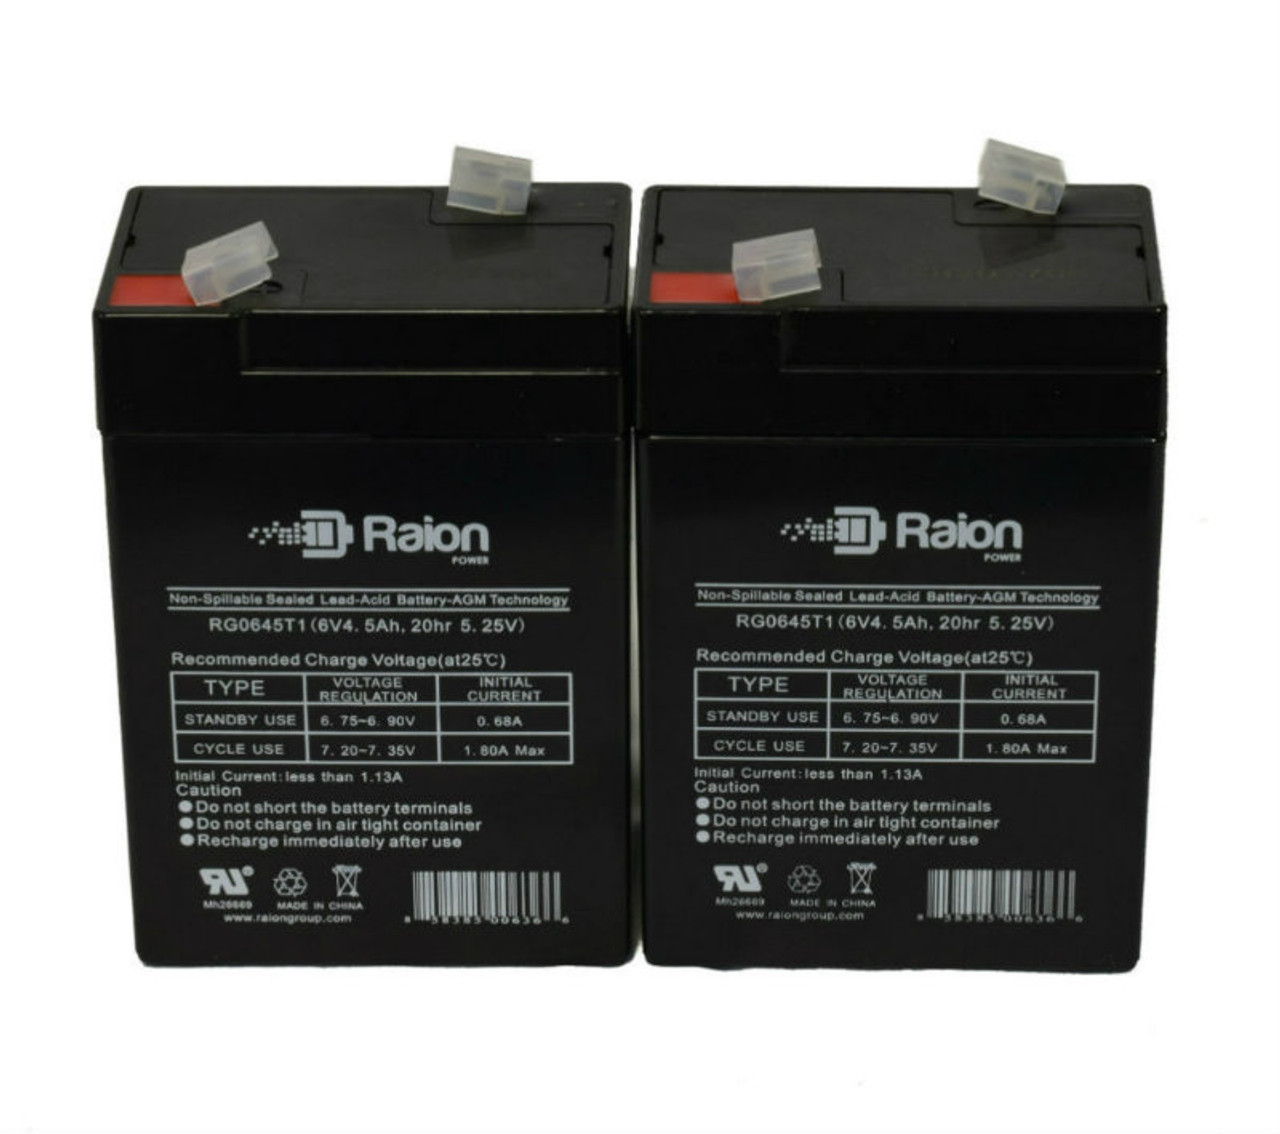 Raion Power RG0645T1 6V 4.5Ah Replacement Medical Equipment Battery for Baxter Healthcare 522 Microate Inf Pump - 2 Pack